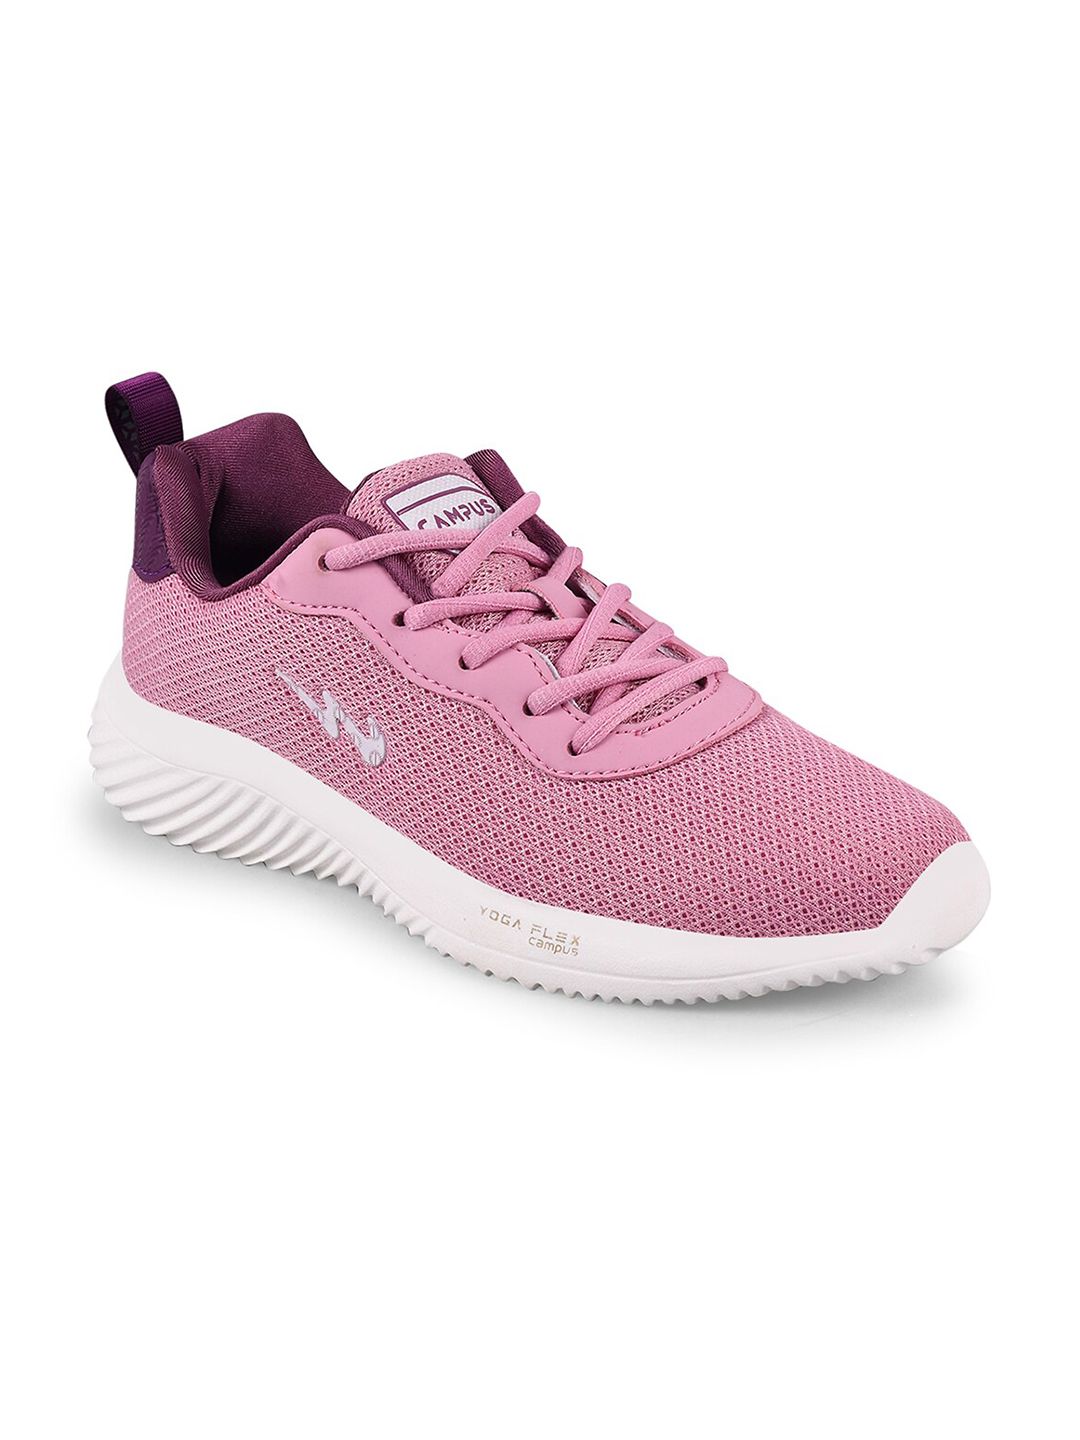 Campus Women LISA Comfortable Mesh Running Non-Marking Shoes Price in India